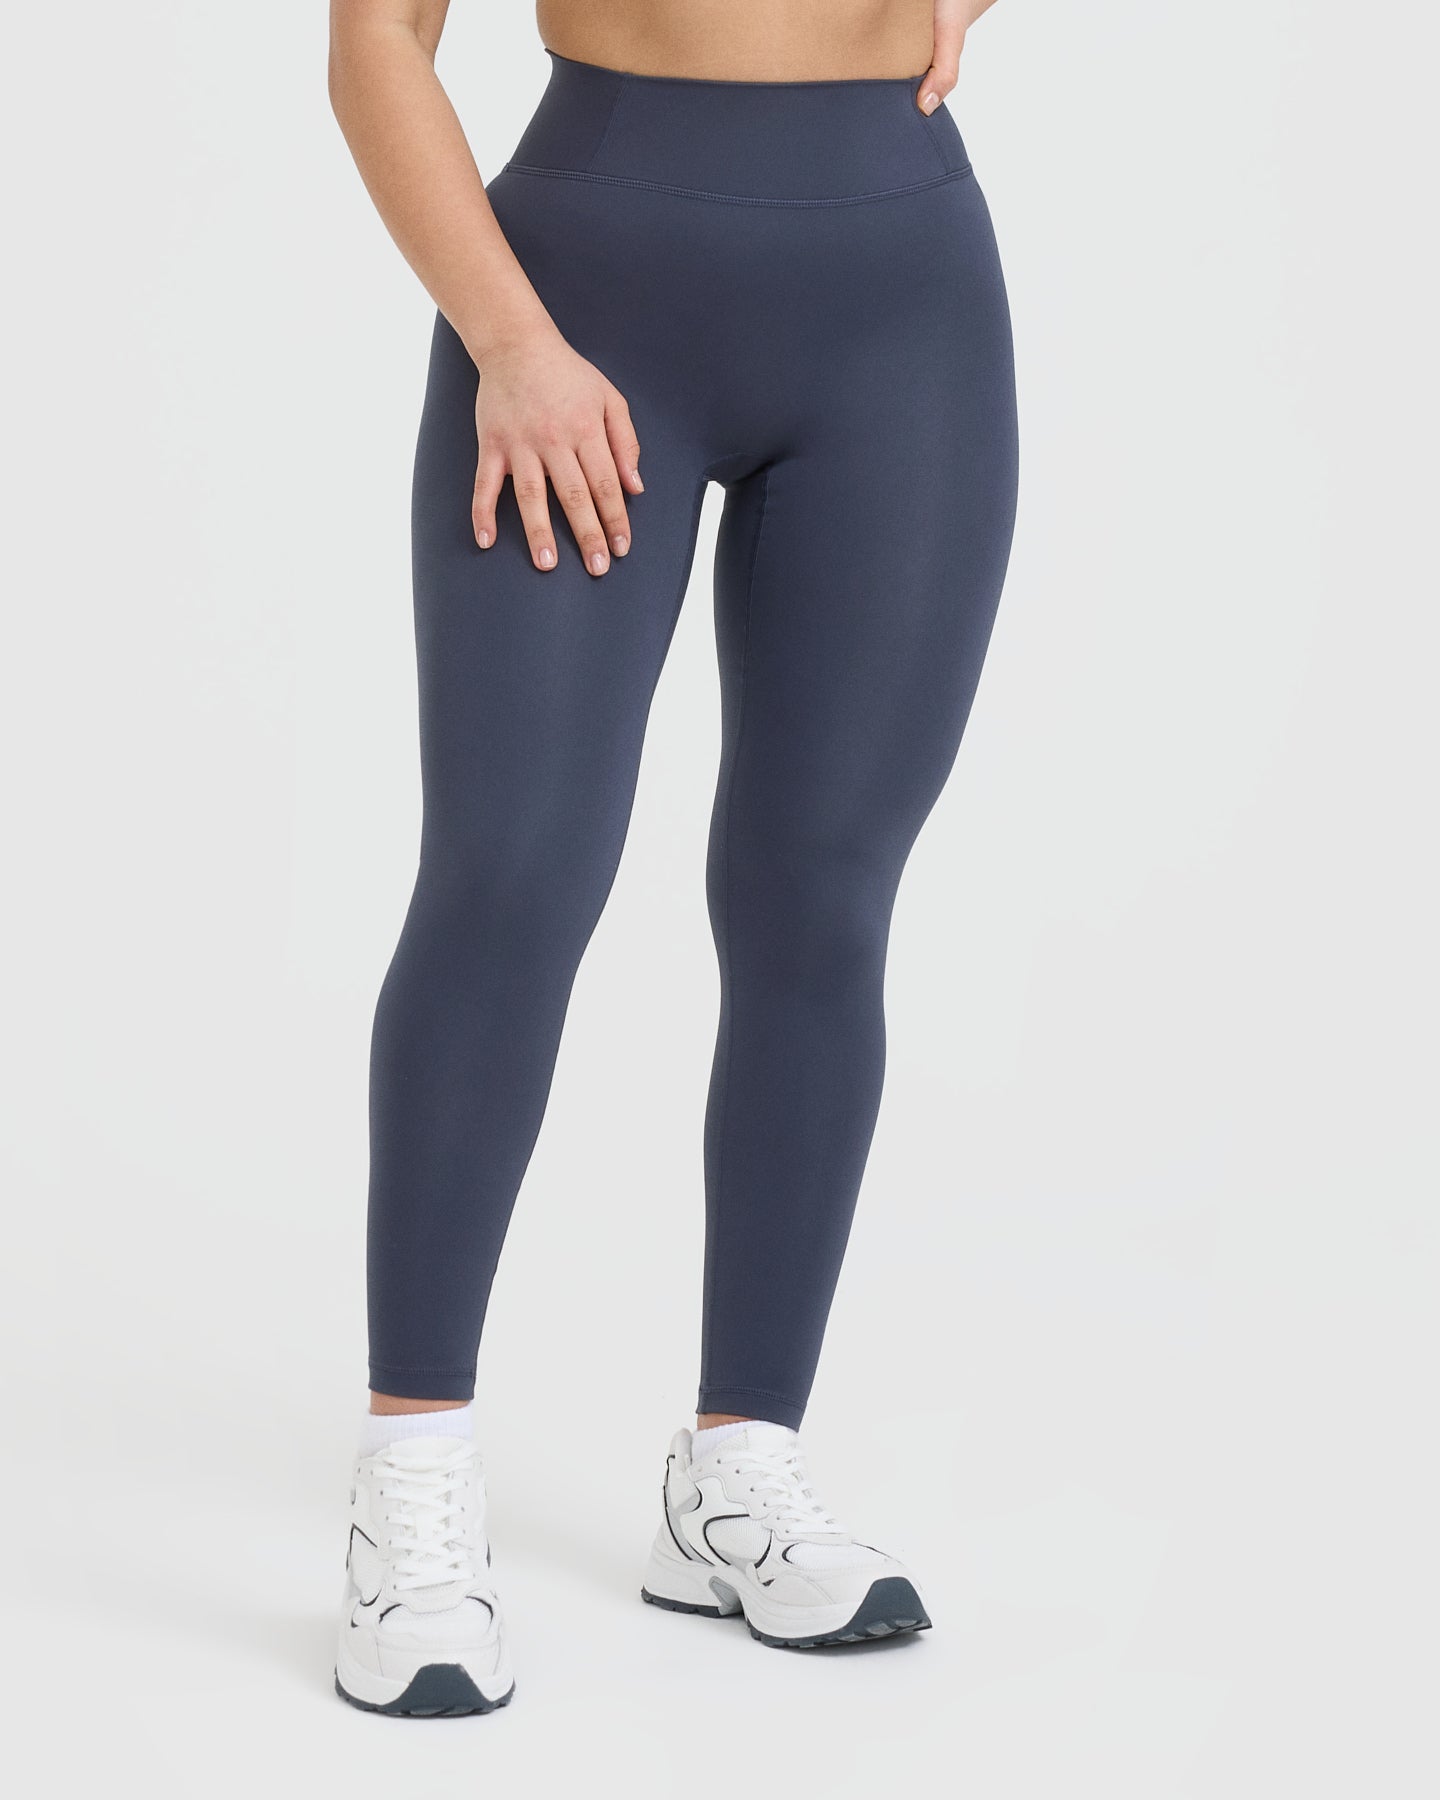 You asked, we listened 🤍 Introducing the Timeless High Waisted Leggings 